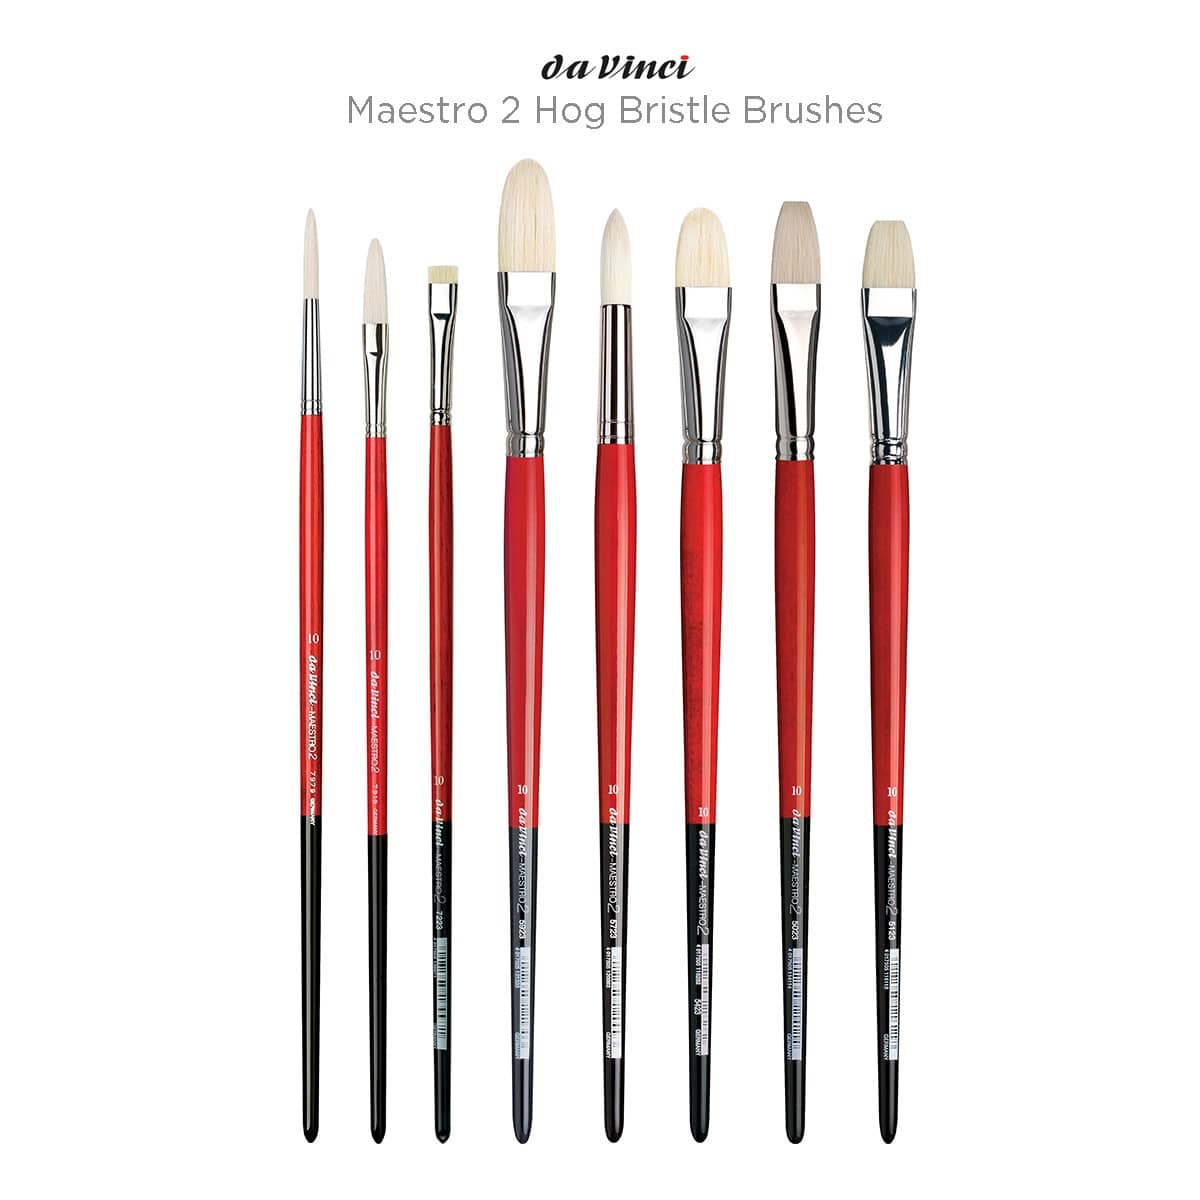 Princeton Summit™ Series 6850 Short Handle Synthetic Brushes